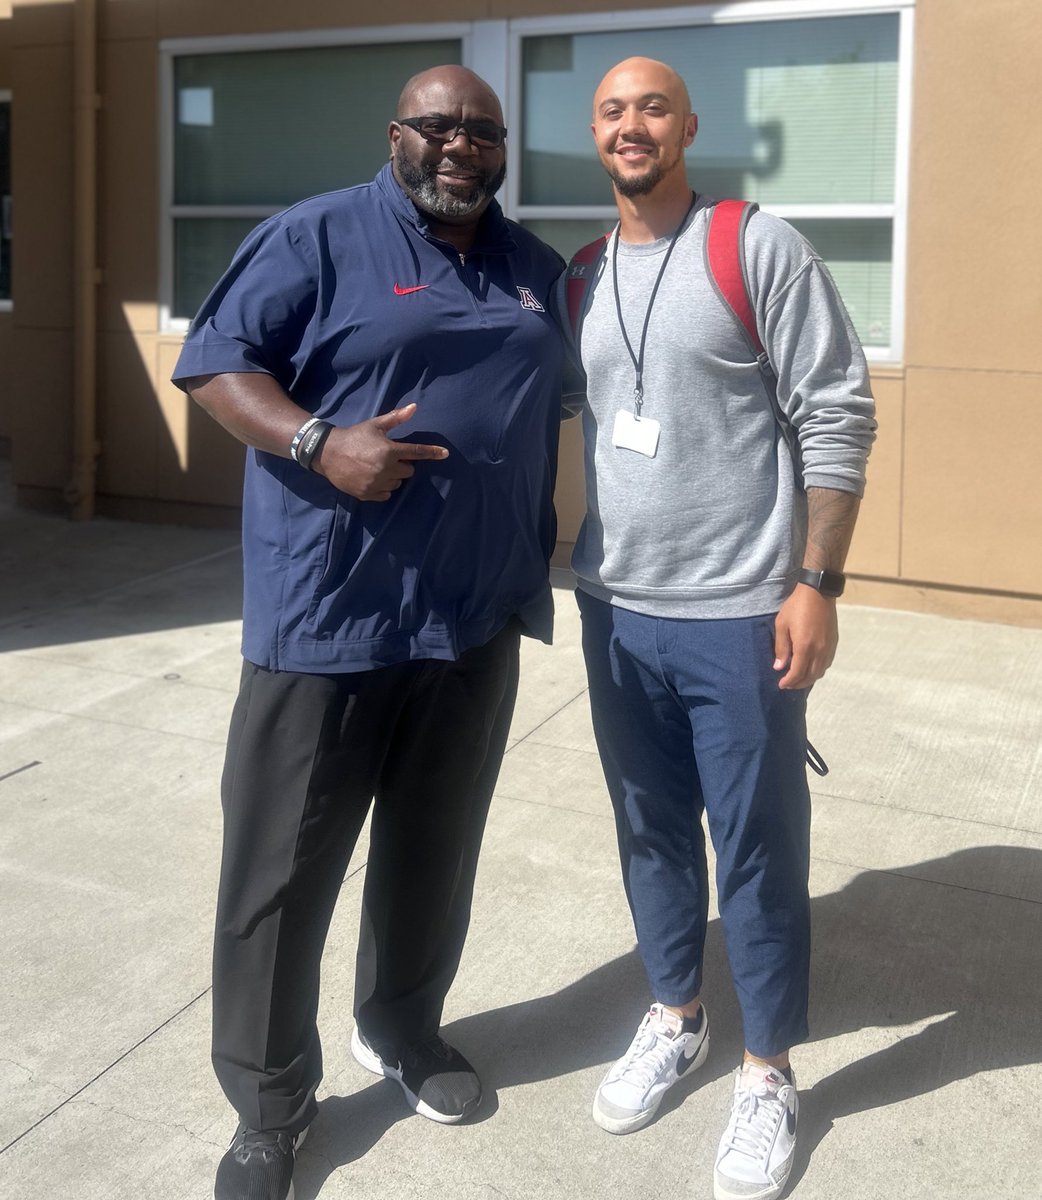 Always good speaking with a lifelong mentor, @RealCoachCarter of @ArizonaFBall ‼️